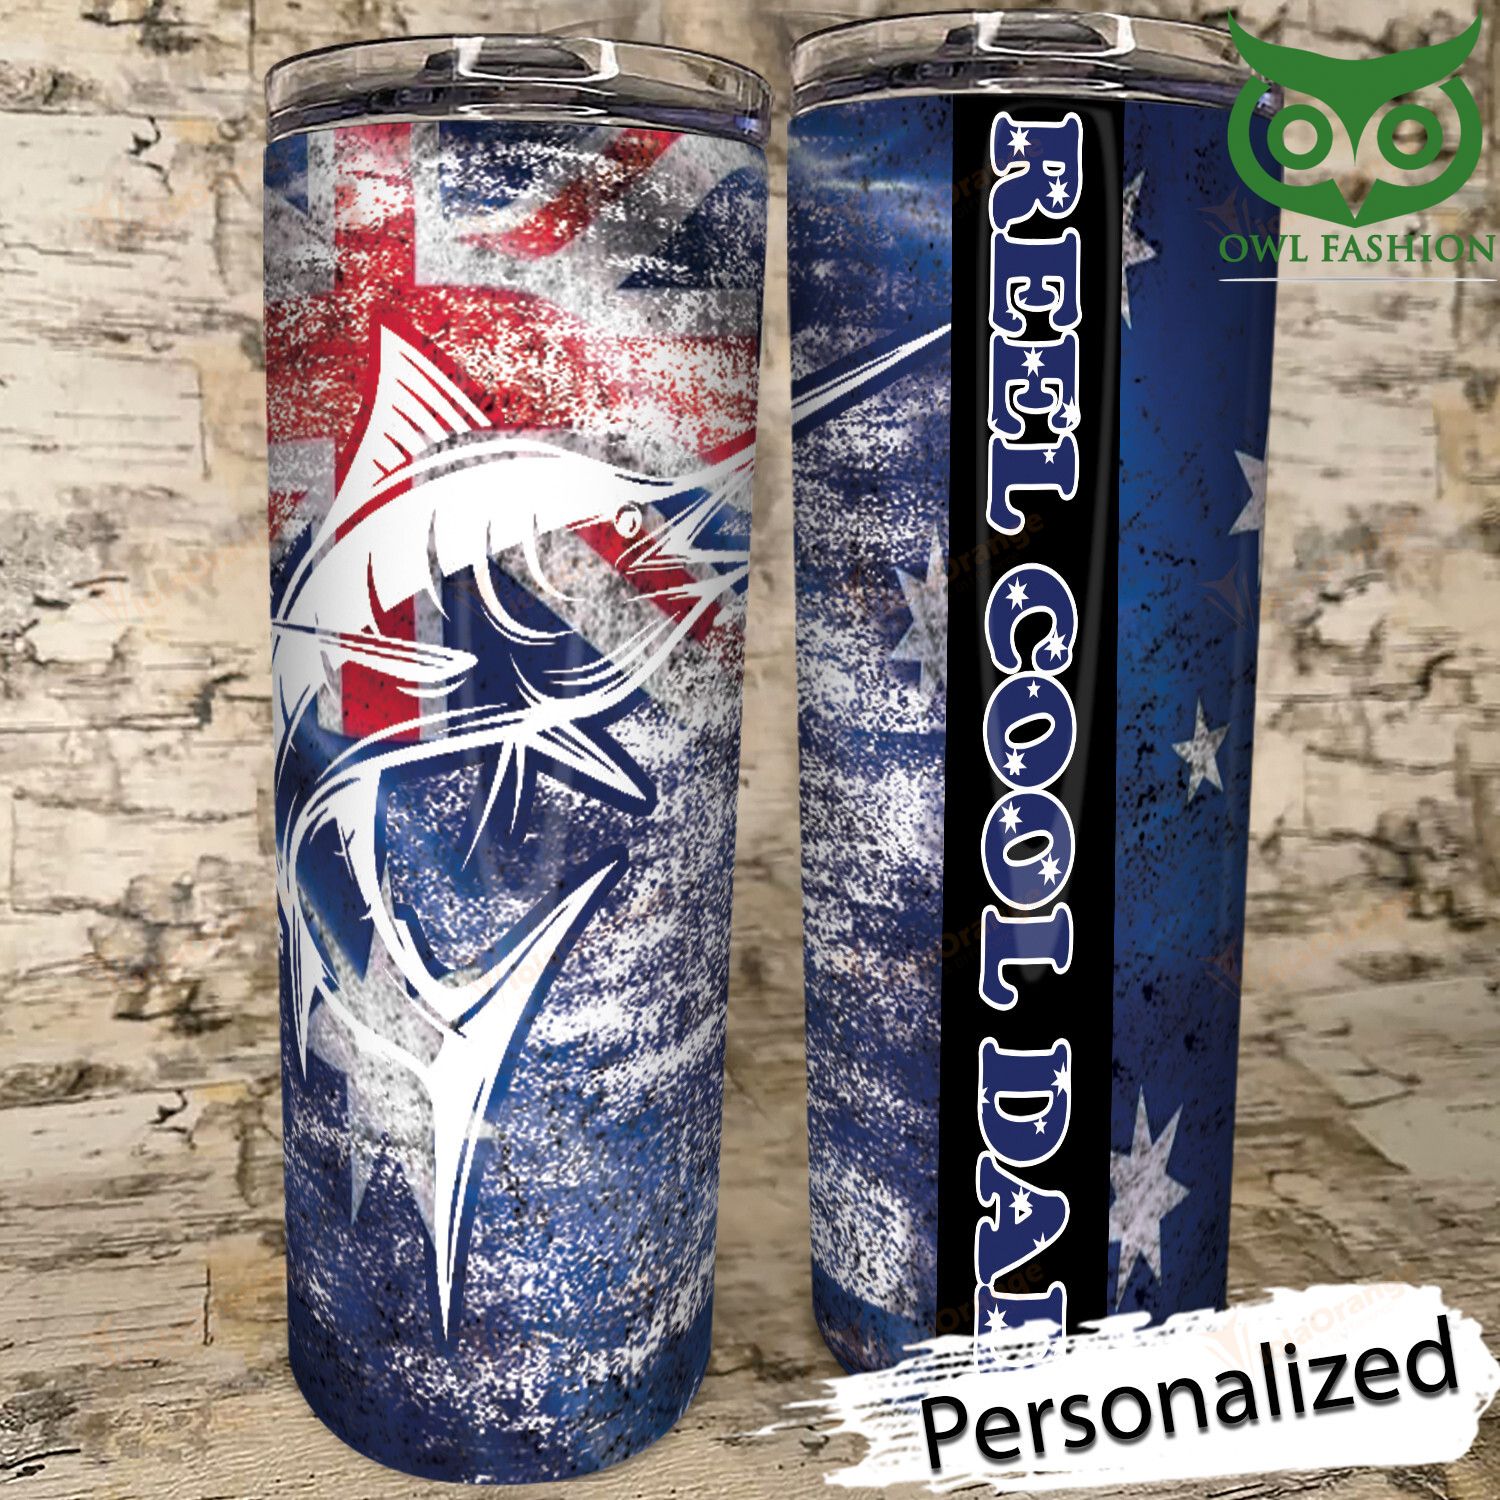 Personalized Aus Fishing Skinny Tumbler cup limited edition